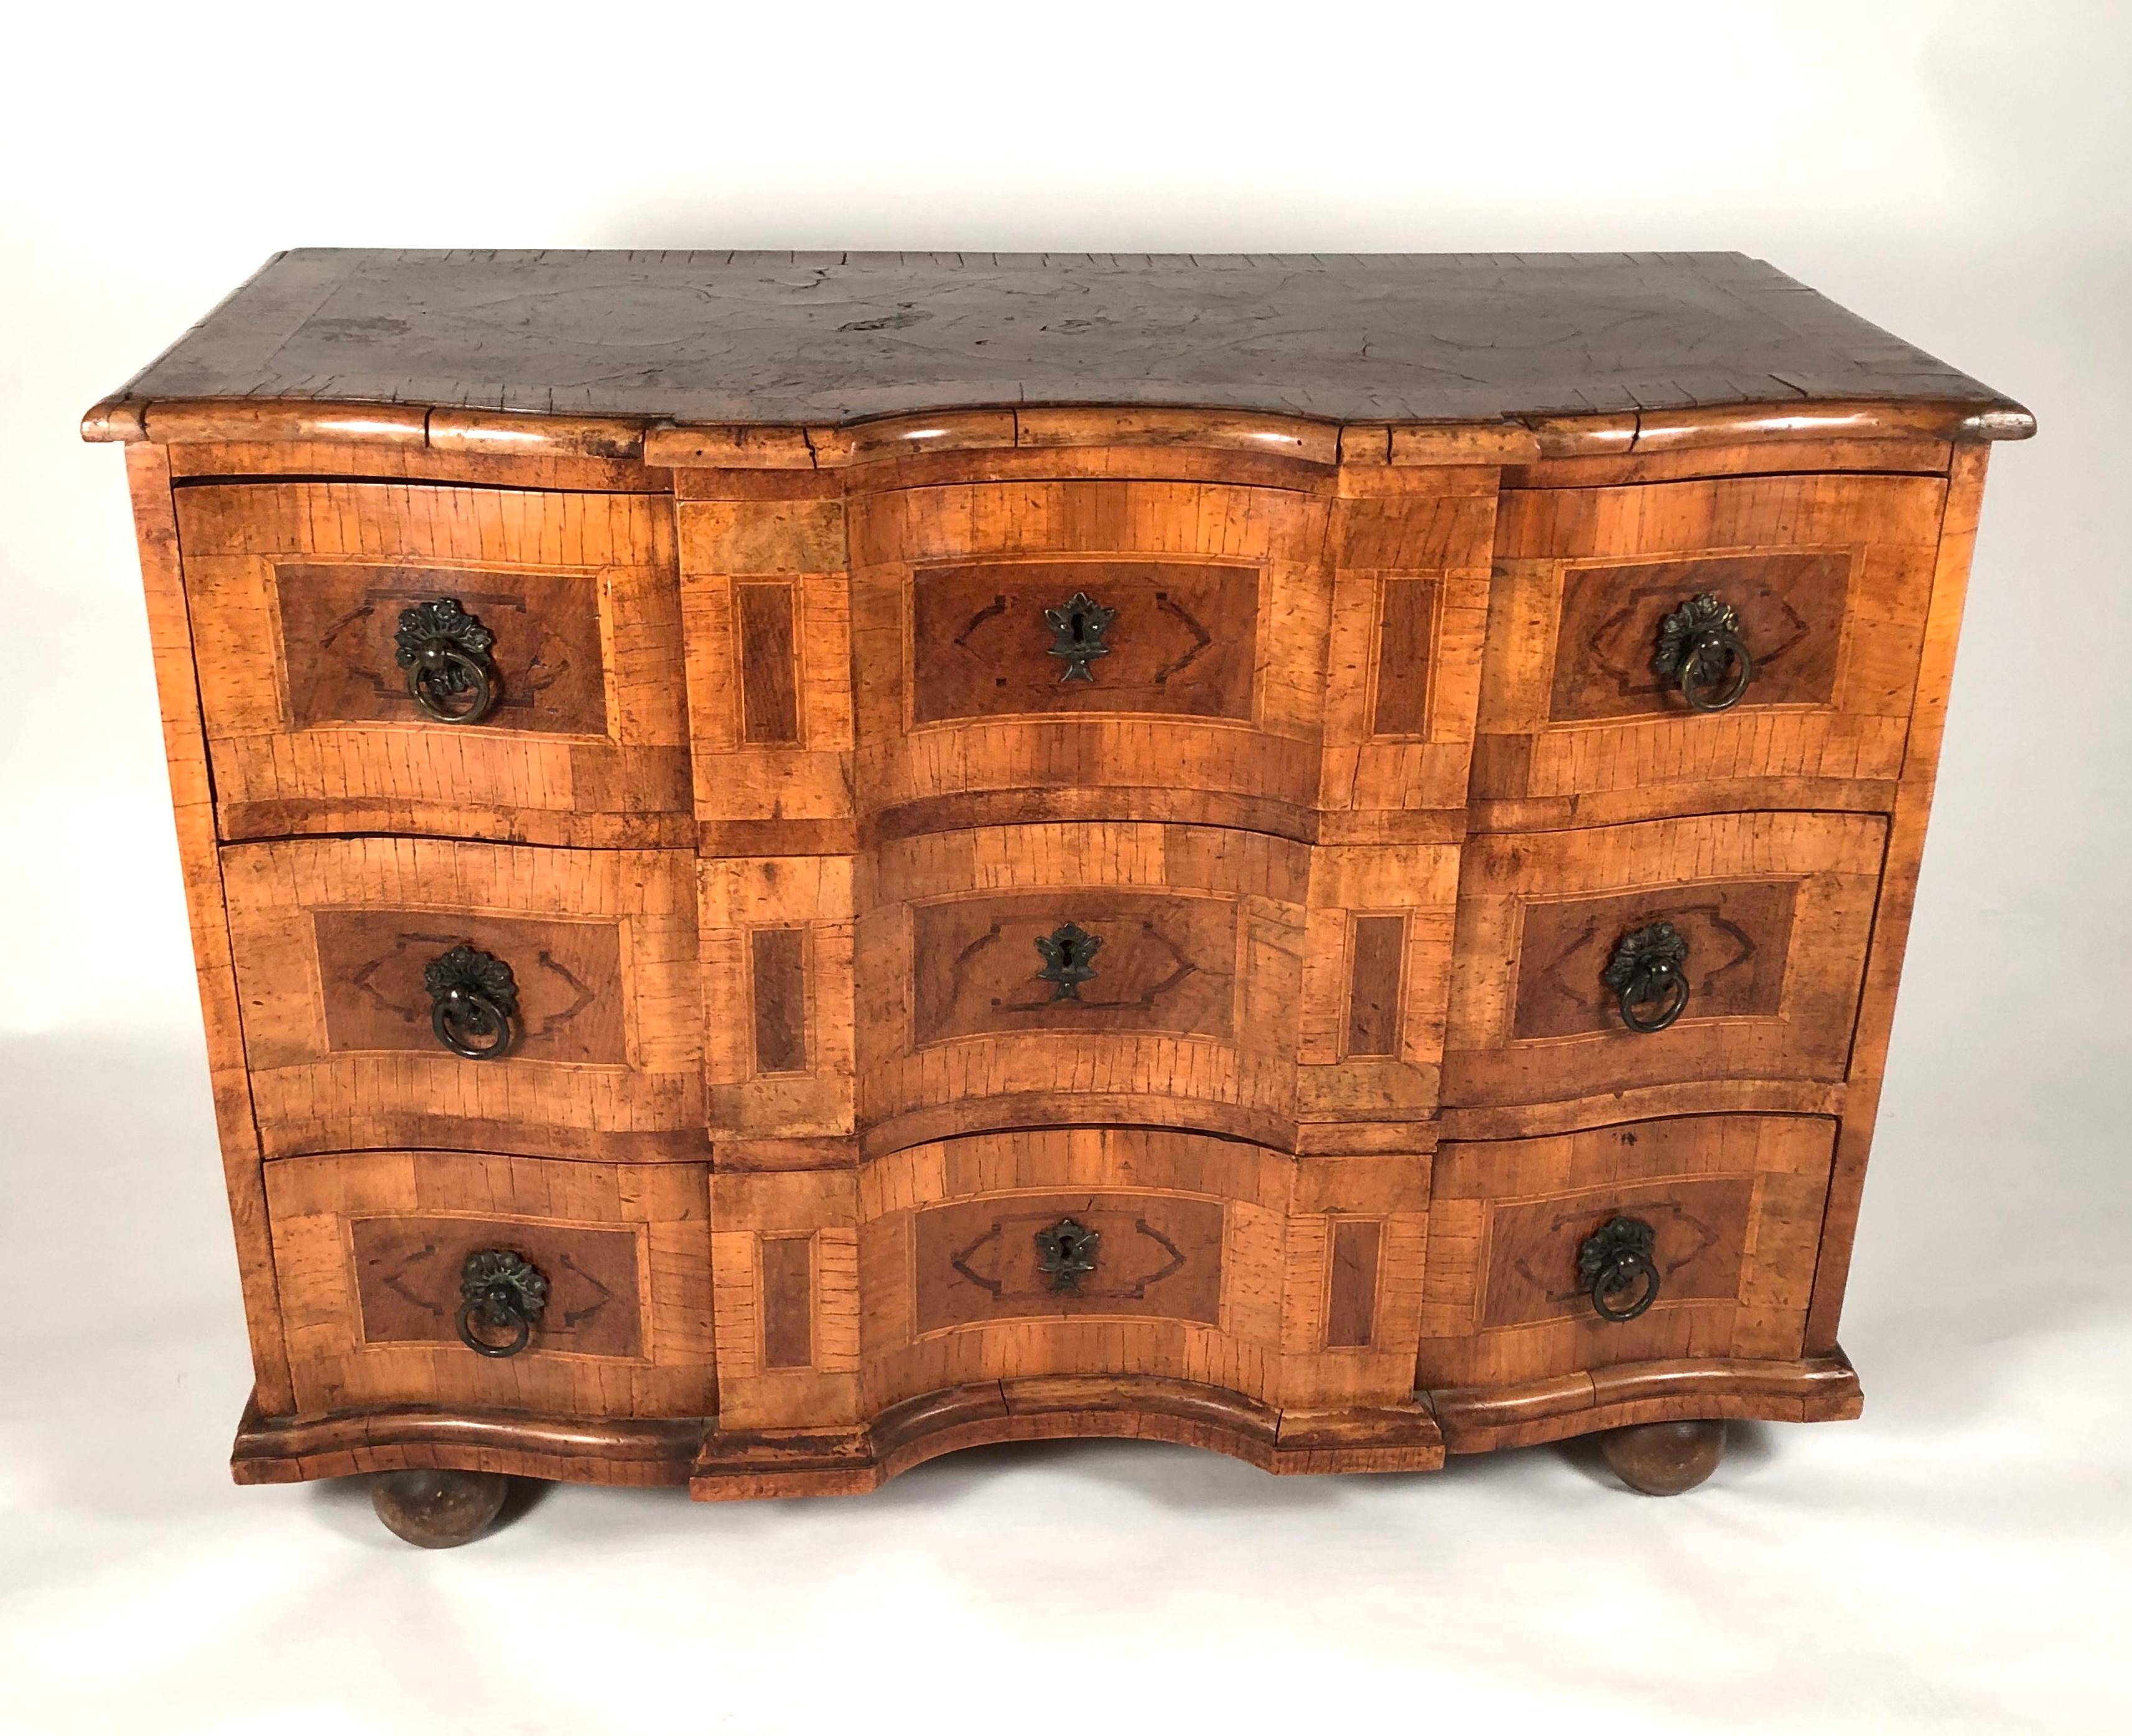 A fine quality  18th century Baroque Austrian burled walnut marquetry commode, circa 1730, with serpentine shaped top decorated with inlaid lozenge design, over 3 conforming serpentine fronted drawers, with marquetry decoration and  later (circa